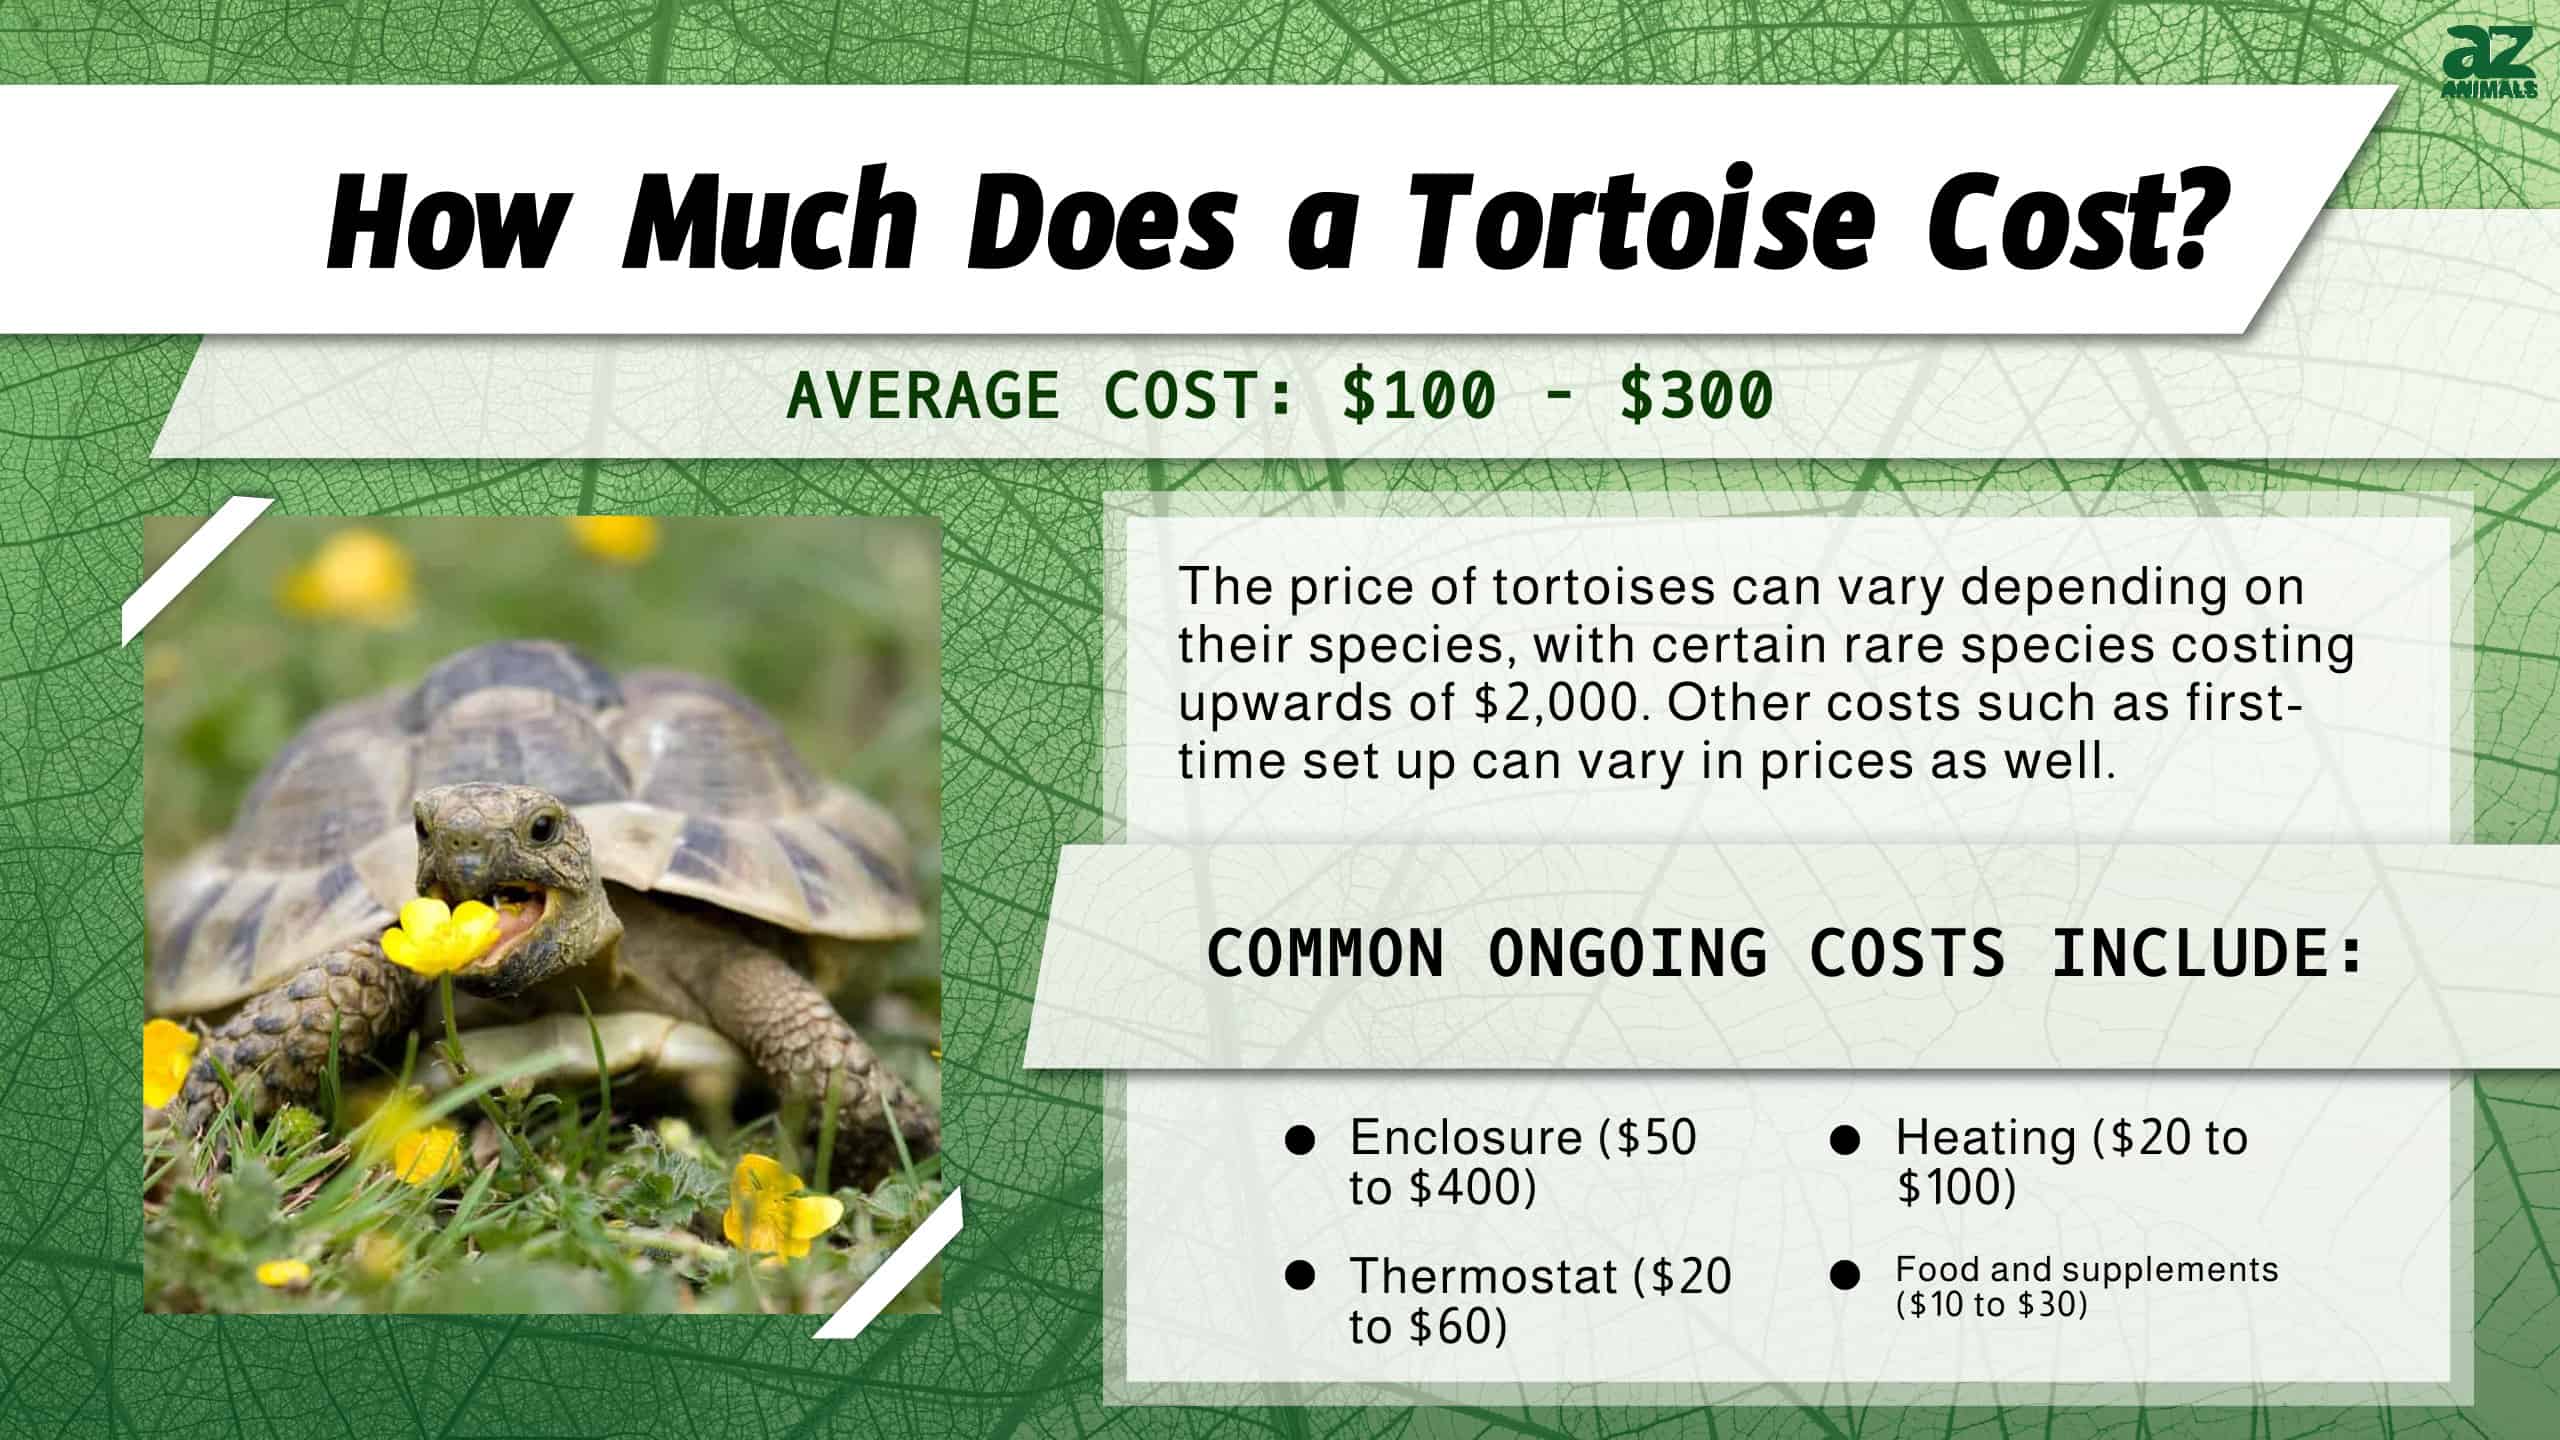 How Much Does a Tortoise Cost?  infographic